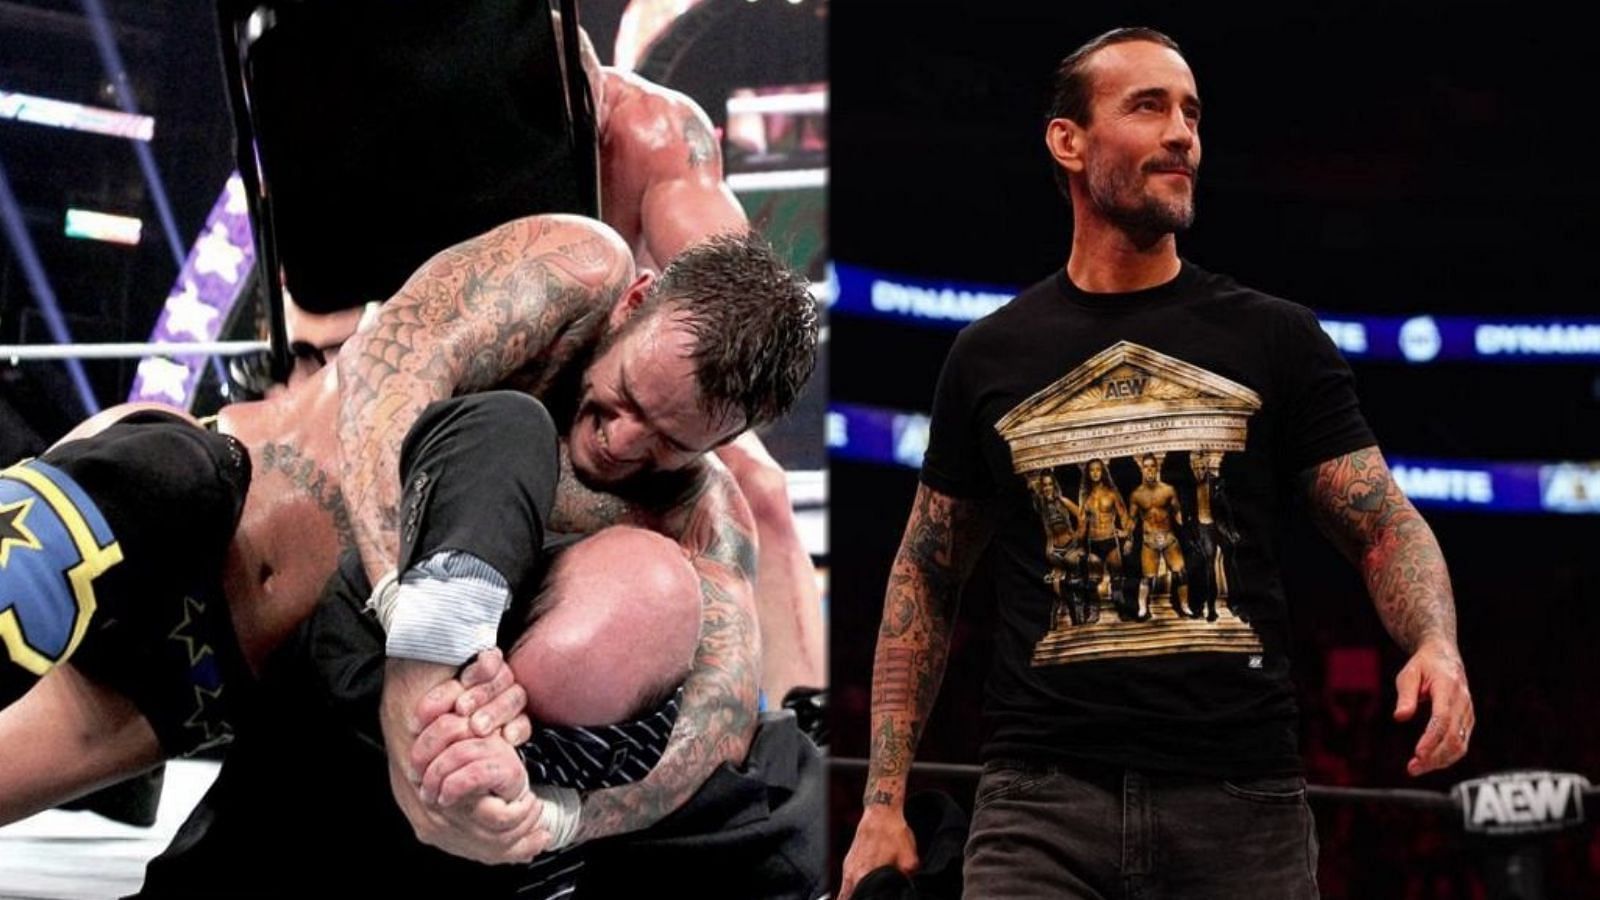 Could Punk have been justified during the backstage brawl?